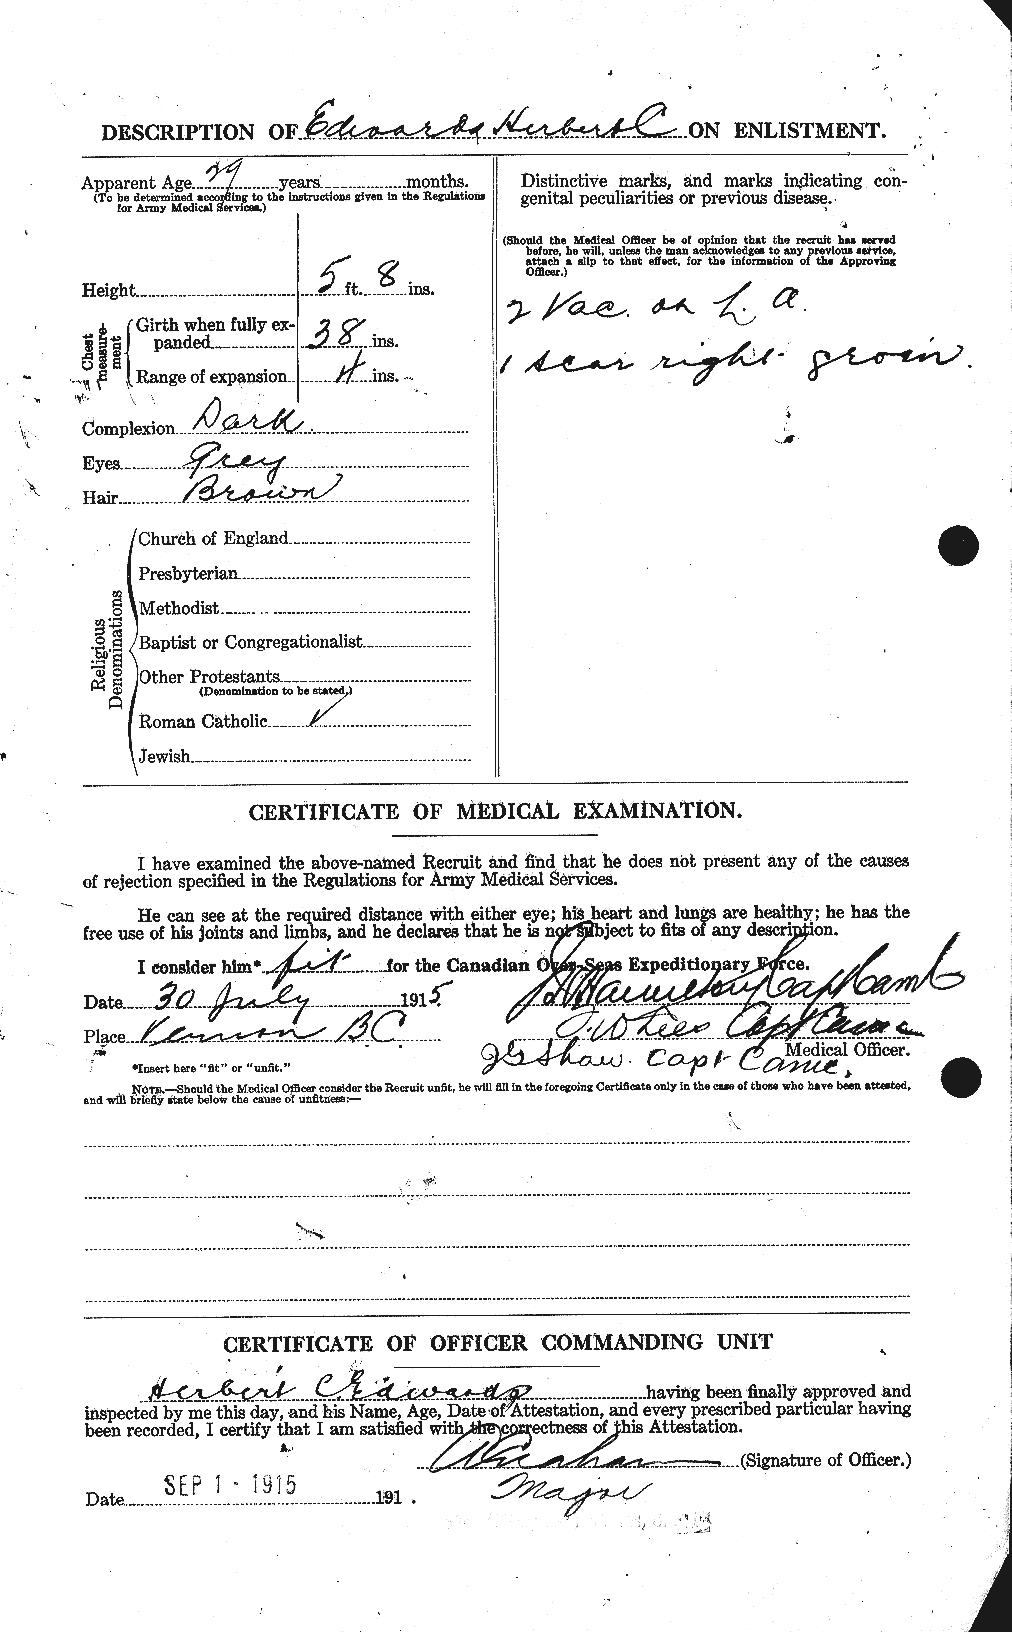 Personnel Records of the First World War - CEF 309772b